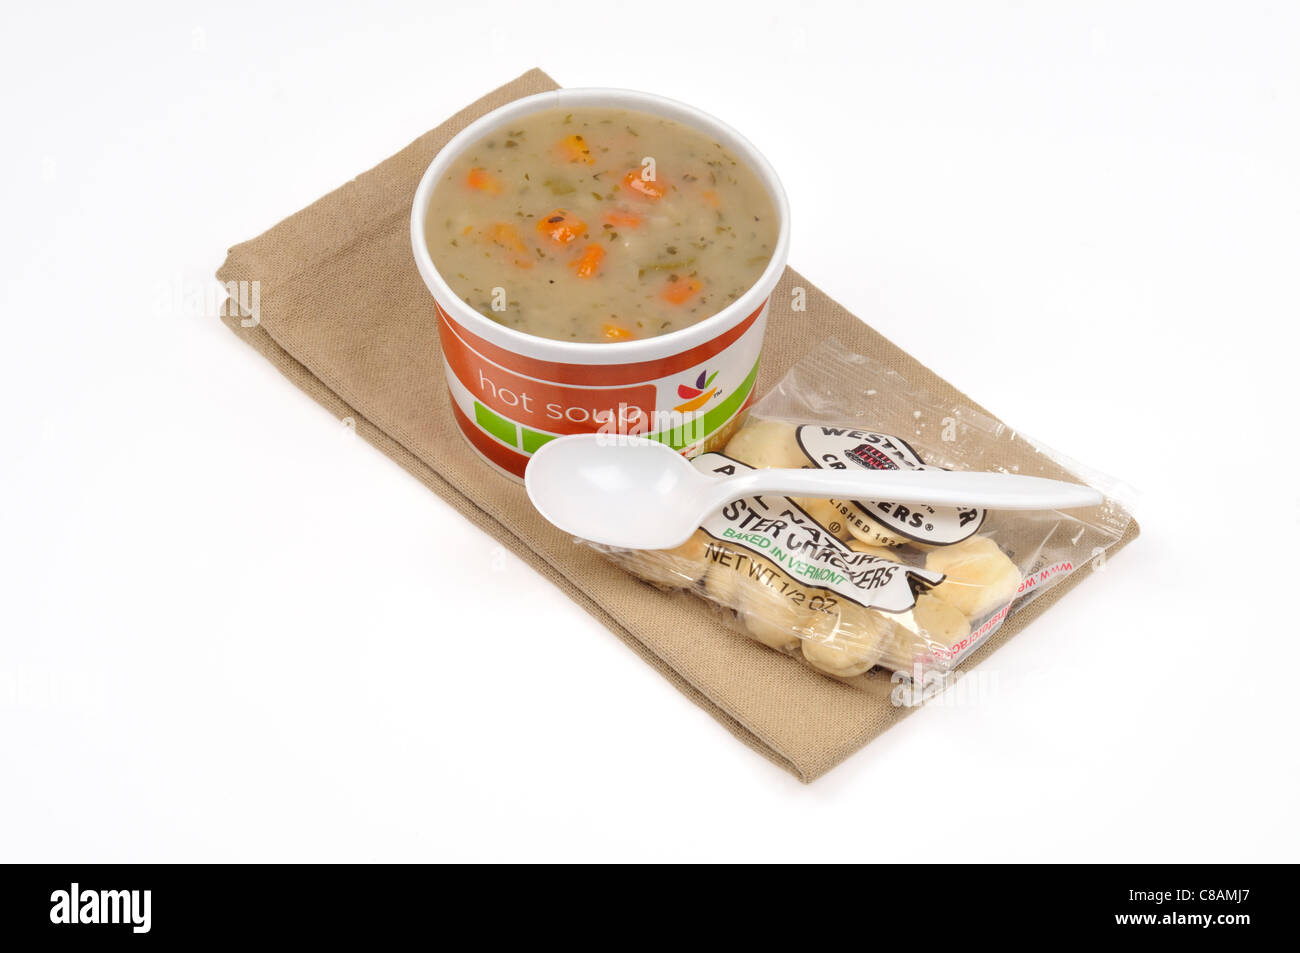 A take away cup of potato and leek soup with a spoon & oyster crackers on white background, cut out. Stock Photo